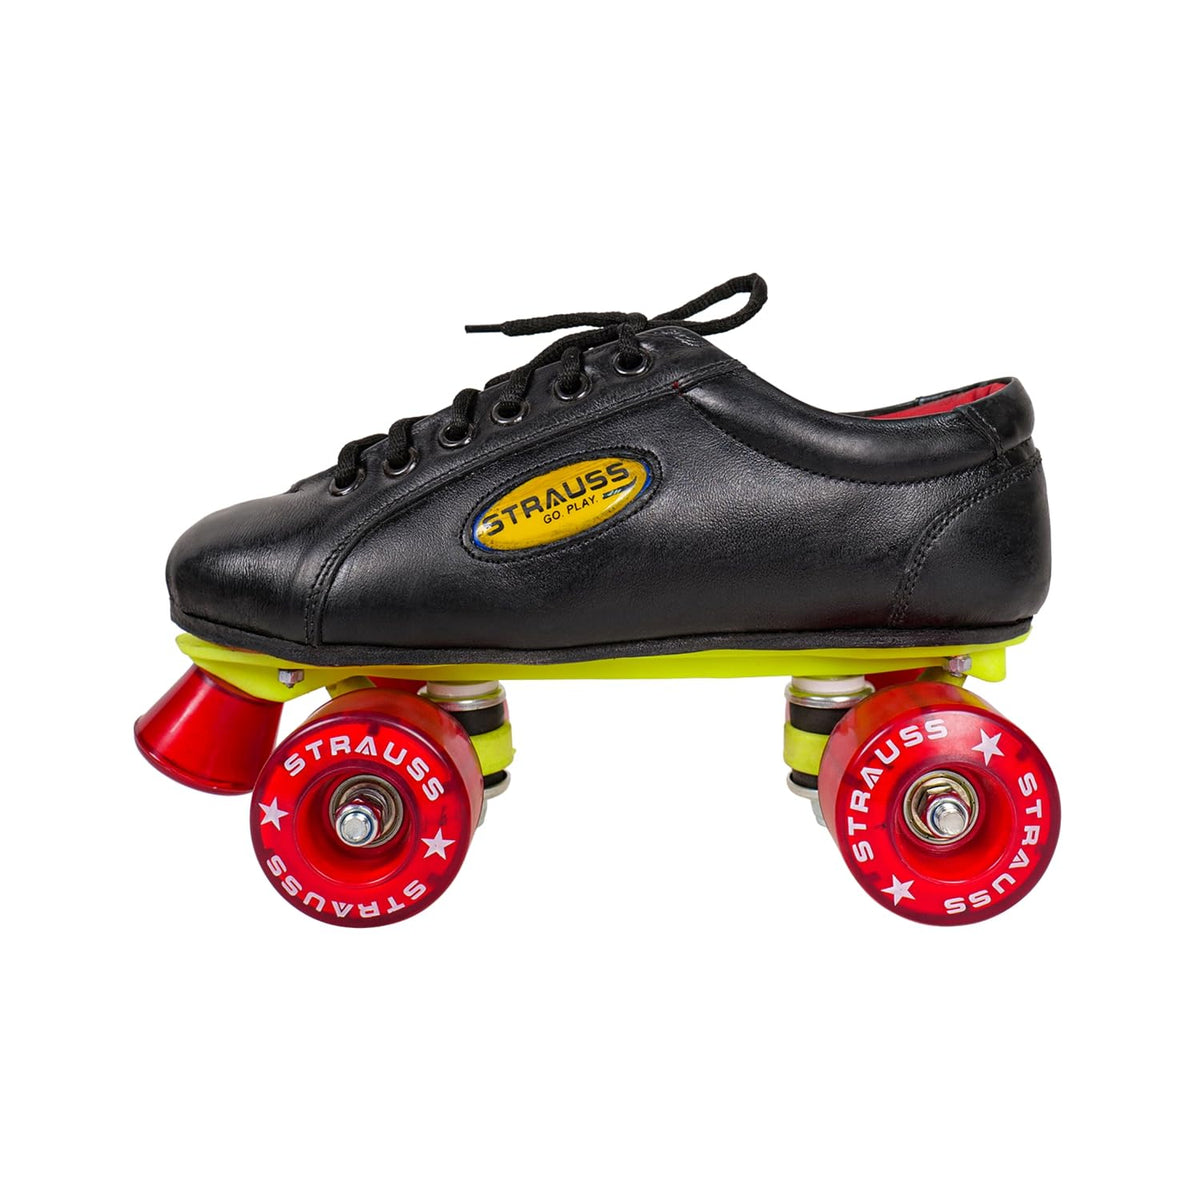 STRAUSS Gripper Skating Shoes | Fixed Body Roller Skates | Shoe Skate with PVC Wheel |Ideal for Boys, Girls and Kids |Suitable for All Skill Level | Ideal for Kids (11-12 Years) Size-4, (Red/Black)